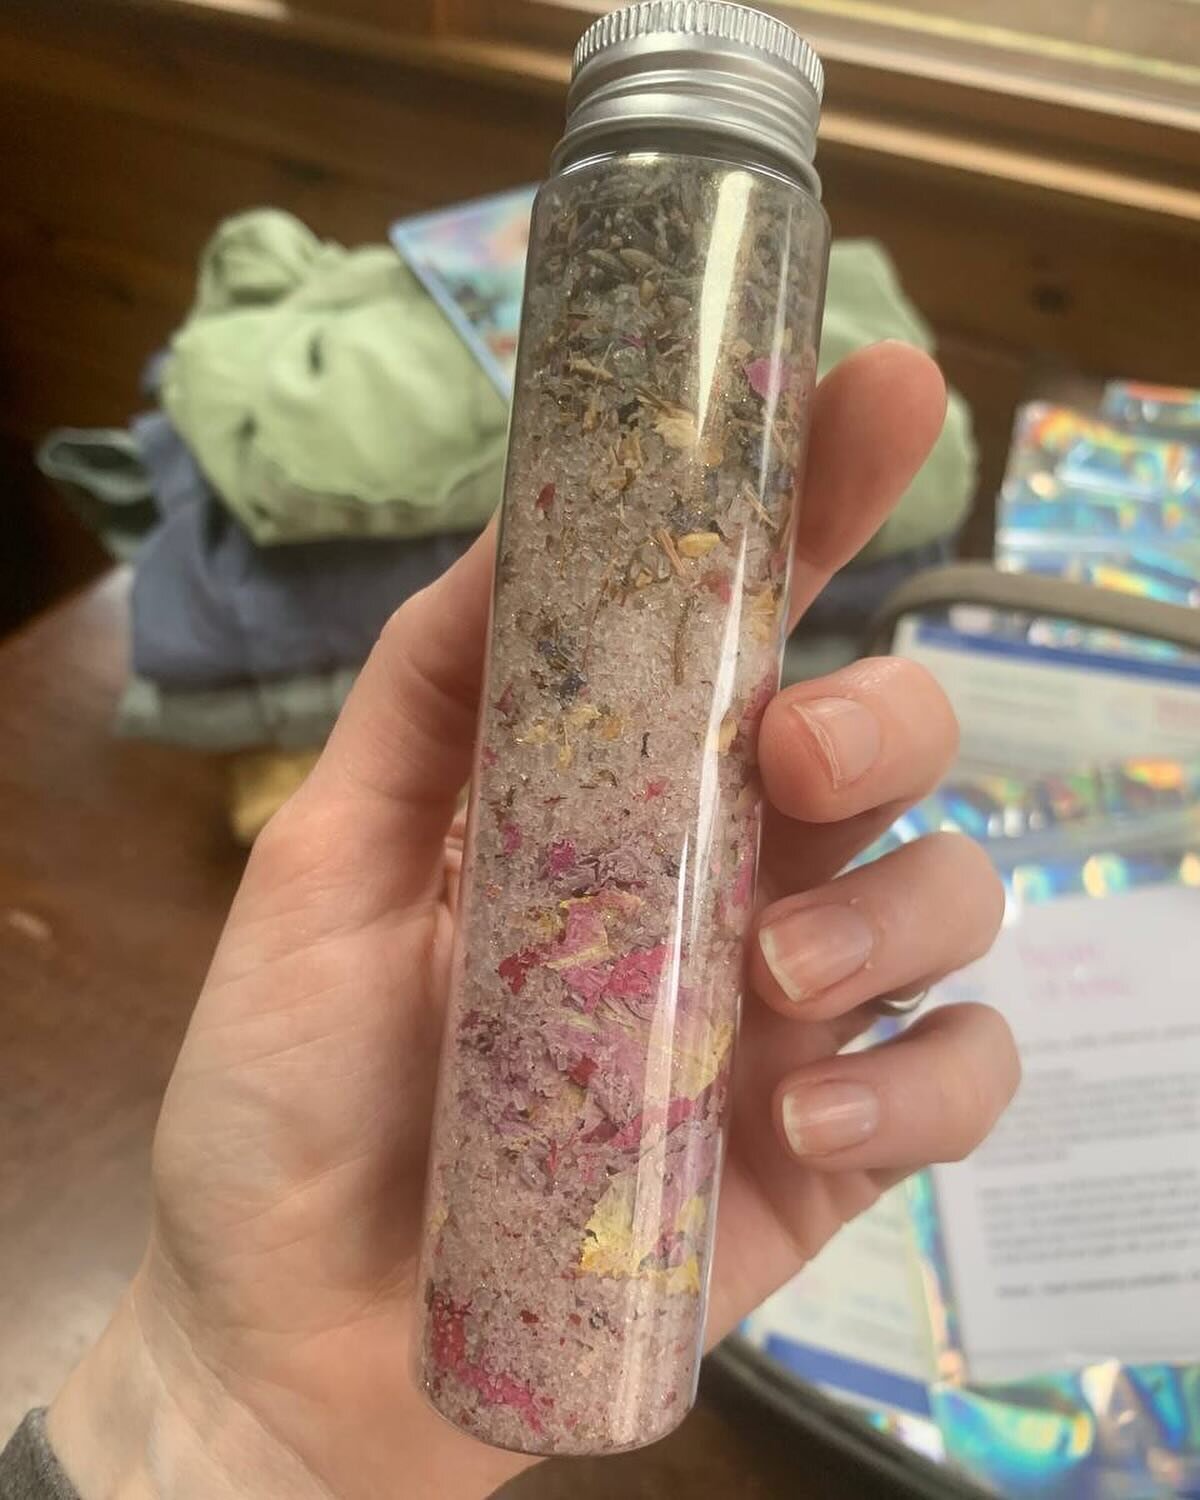 ✨ The magic is building ✨ This blend of sacred foot bath salts was made with love by our own @faeth_diver with cleansing salts, rose petals, lavender, essential oils, crystals and golden simmer. ✨We can&rsquo;t wait to greet you at the threshold of t